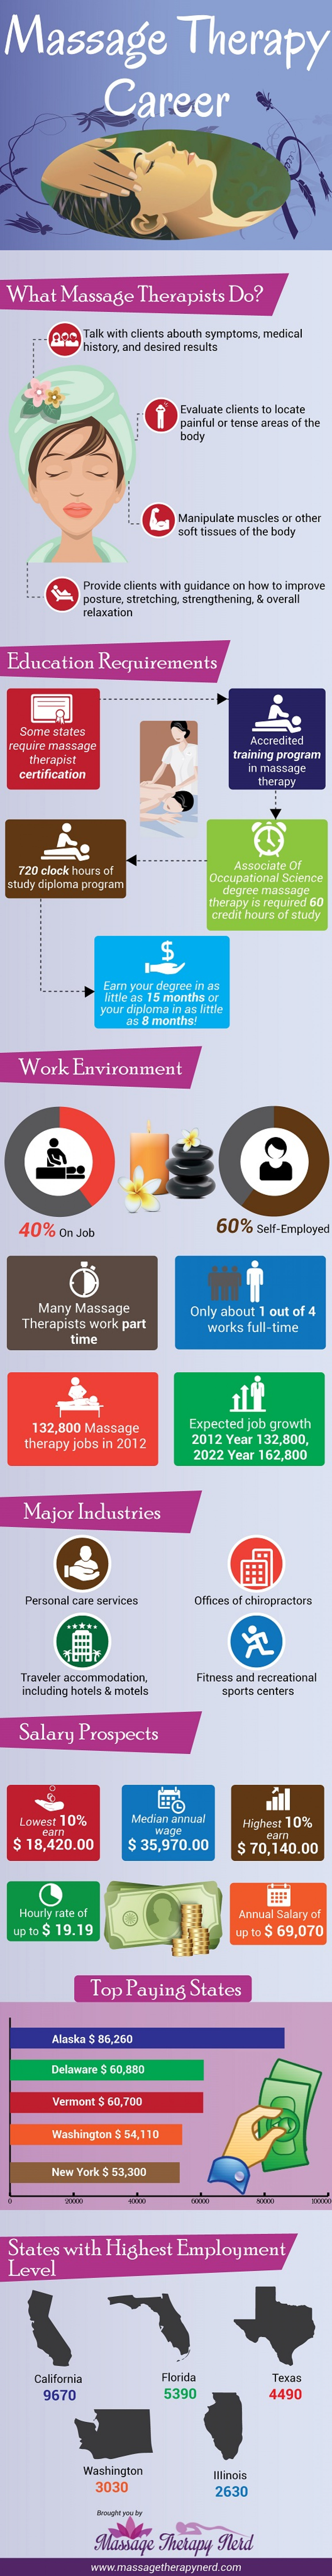 Massage Therapy Career Infographic